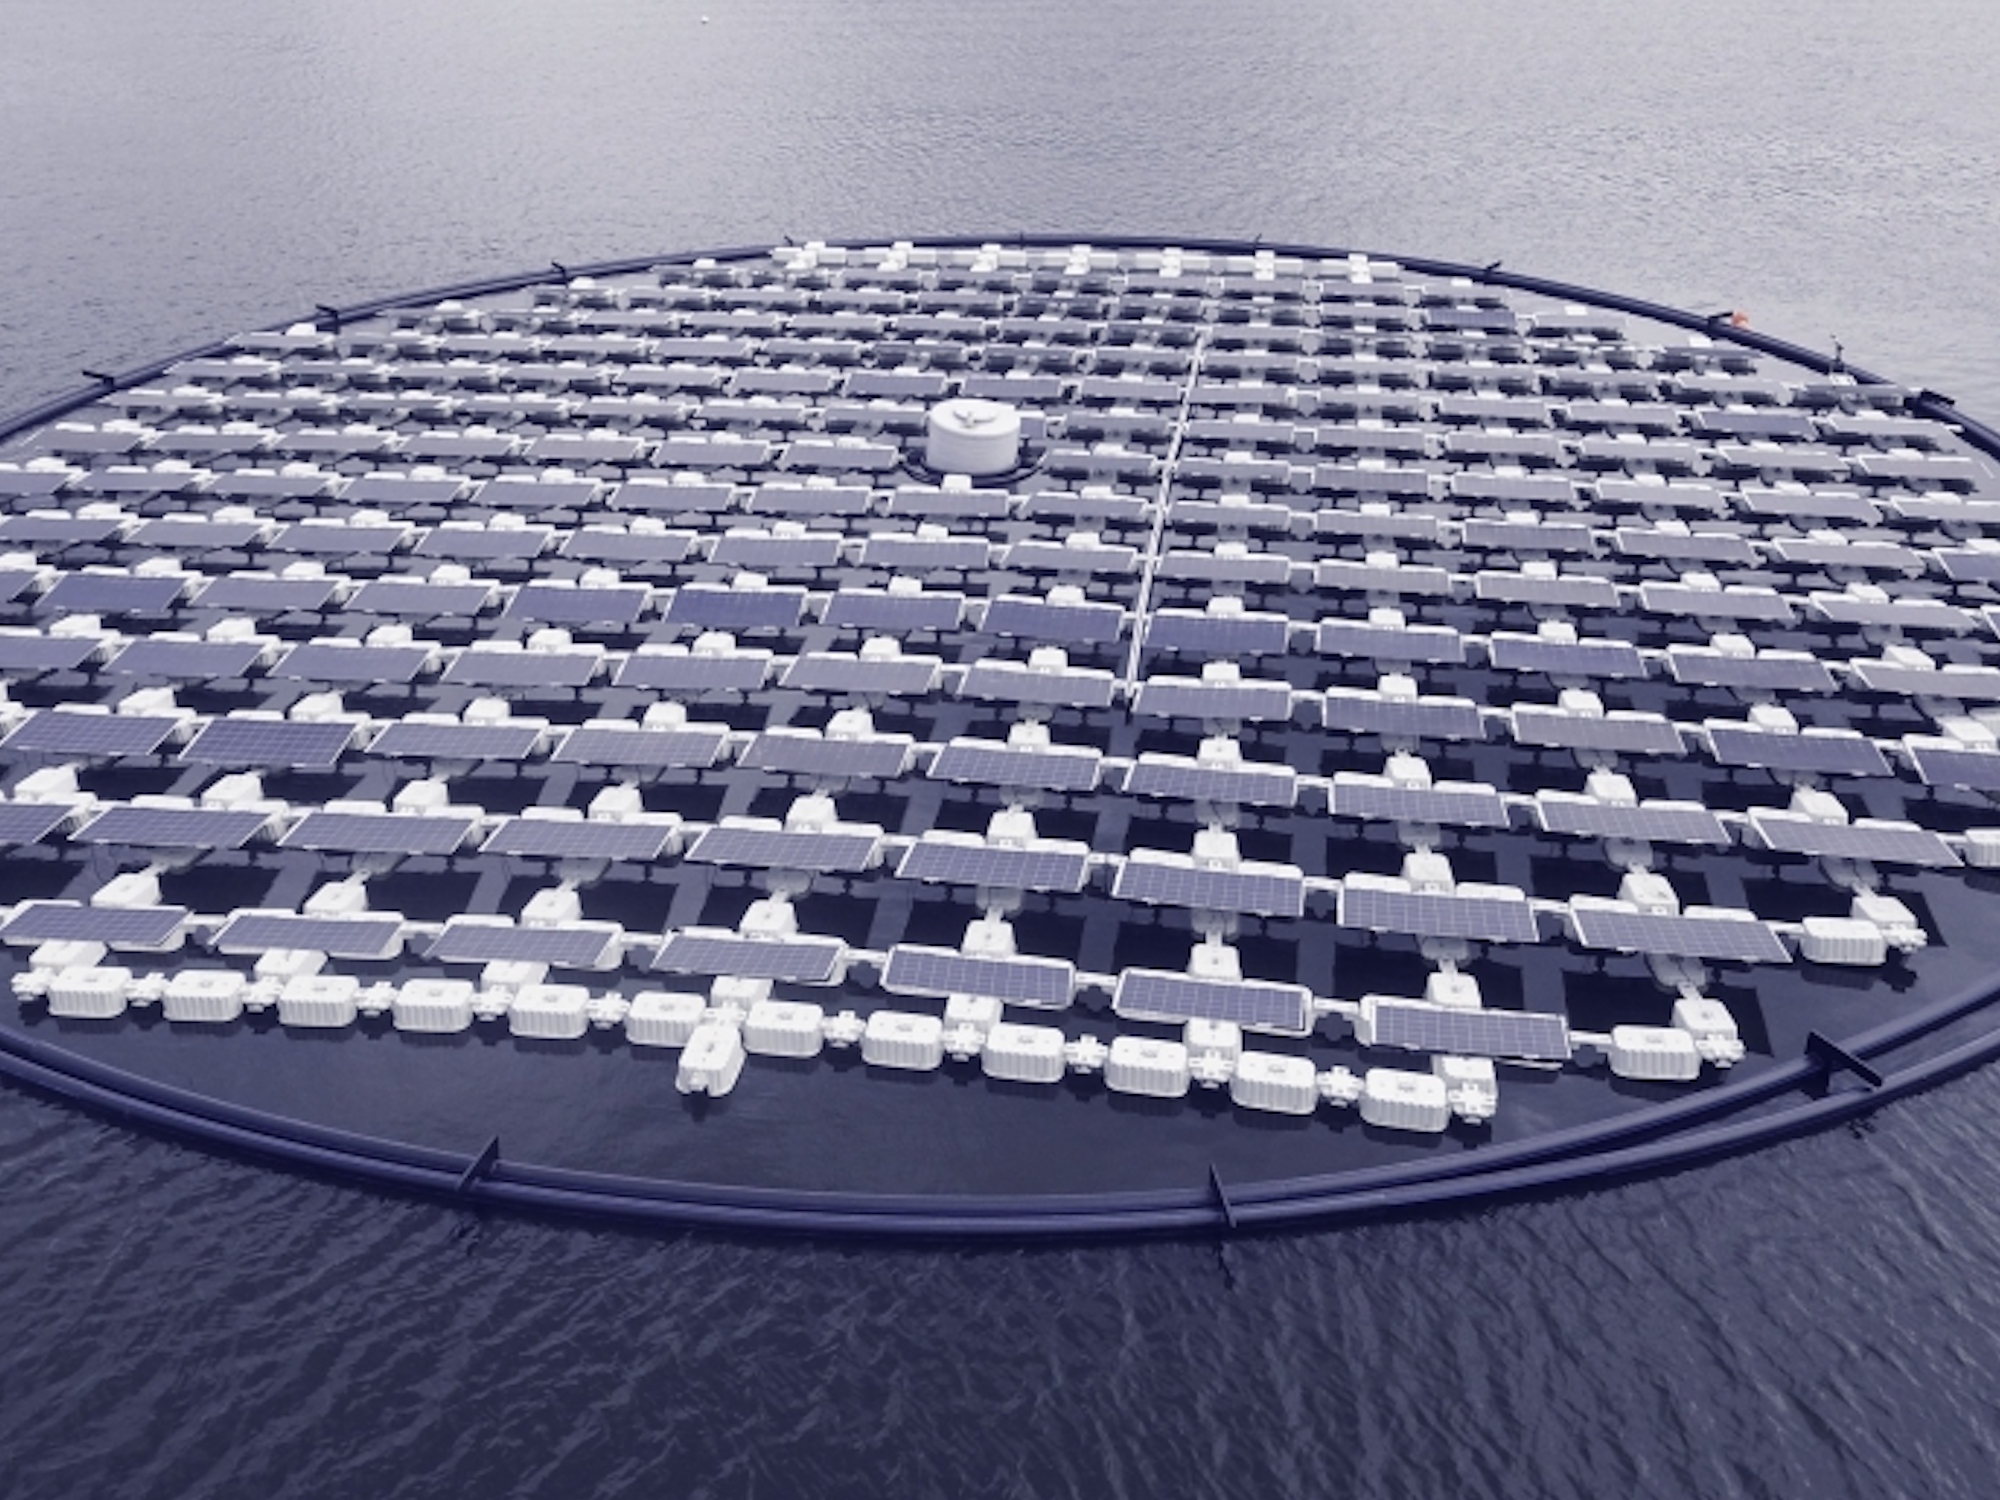 Solaris Float Proteus floating solar panel array on body of water